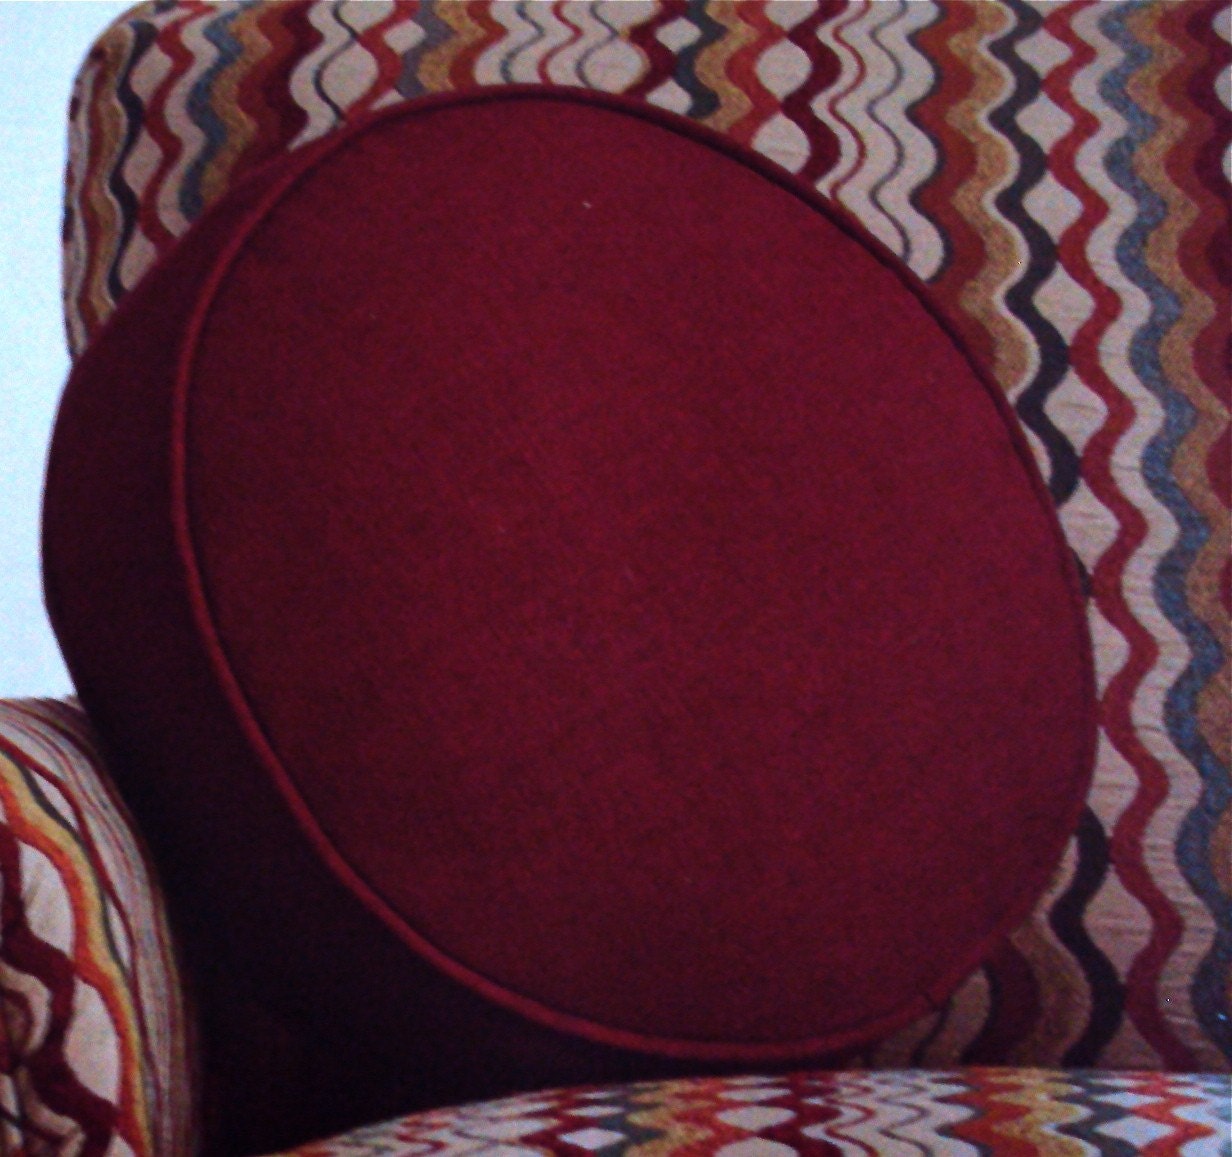 Round Pillow or Cushion/Floor Pillow In Deep Red Fabric by idari